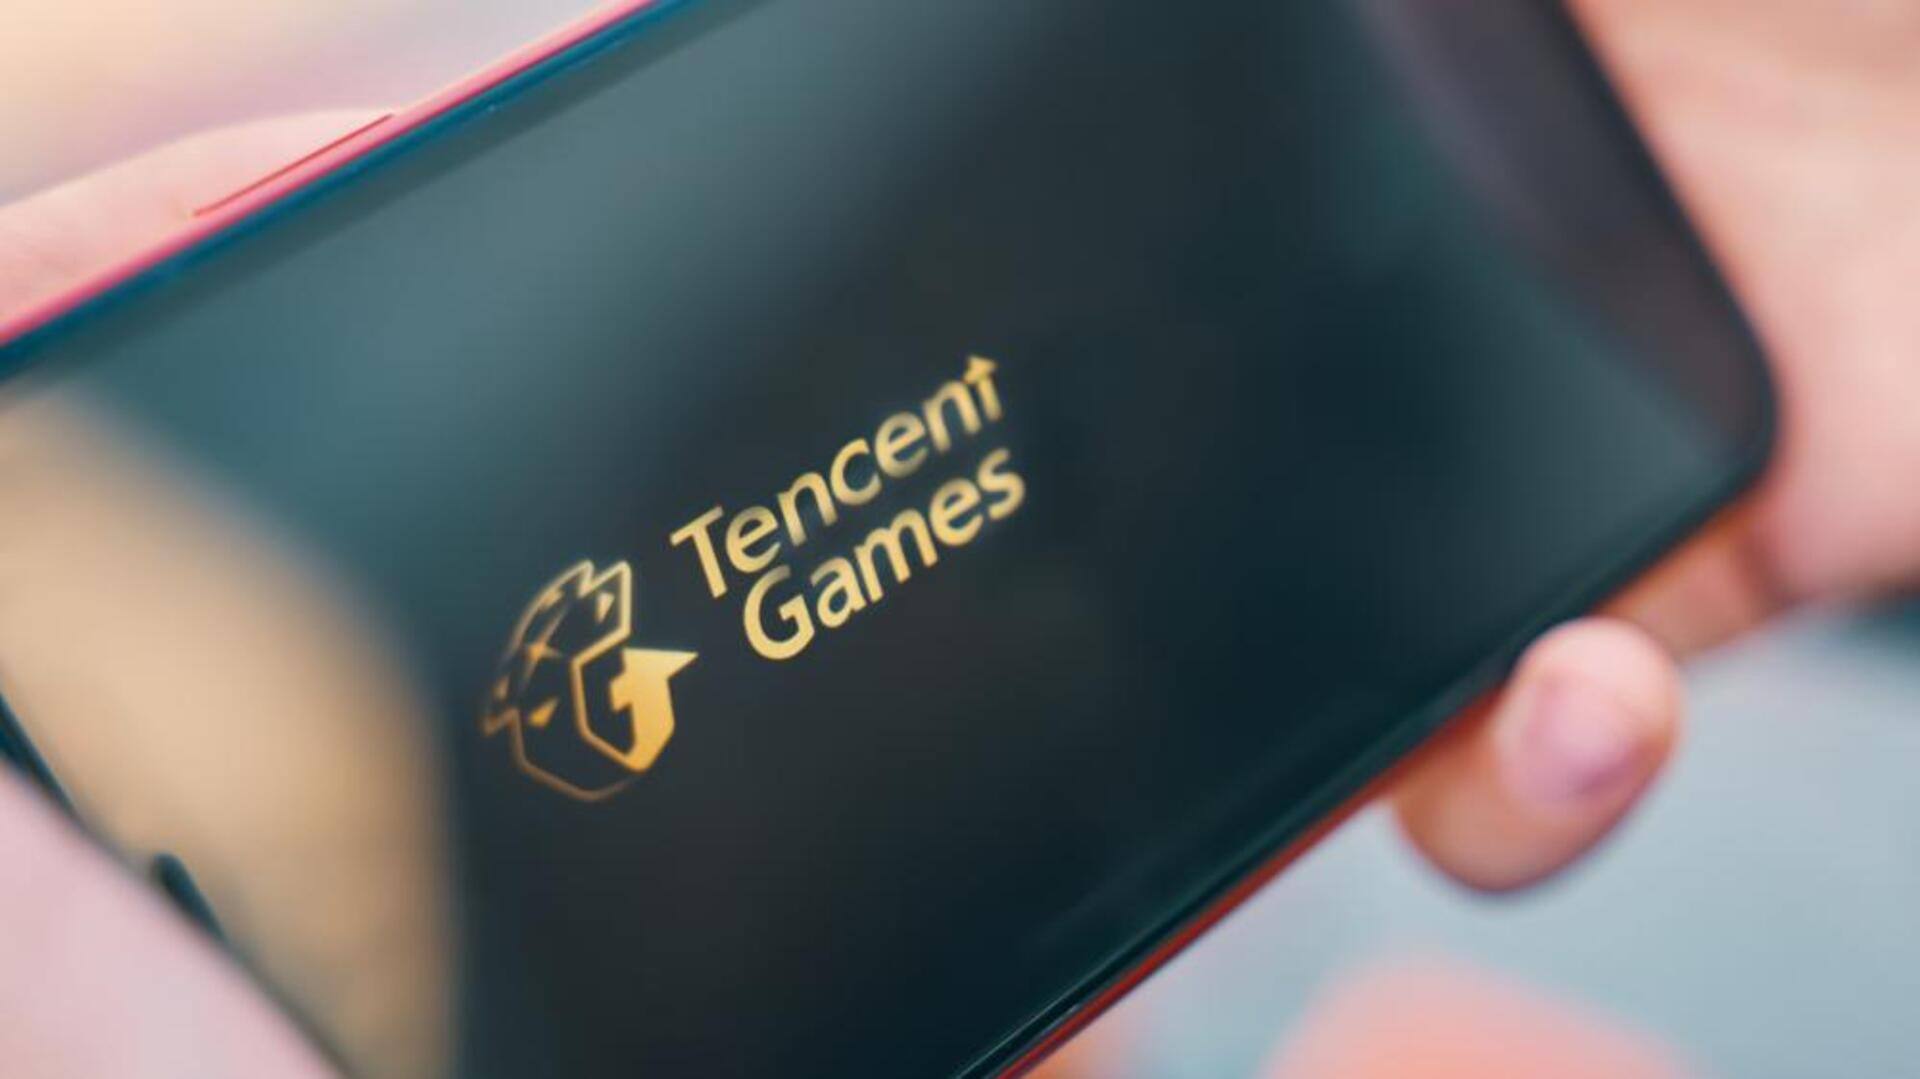 Tencent loses $46bn in m-cap amid China's online gaming curbs